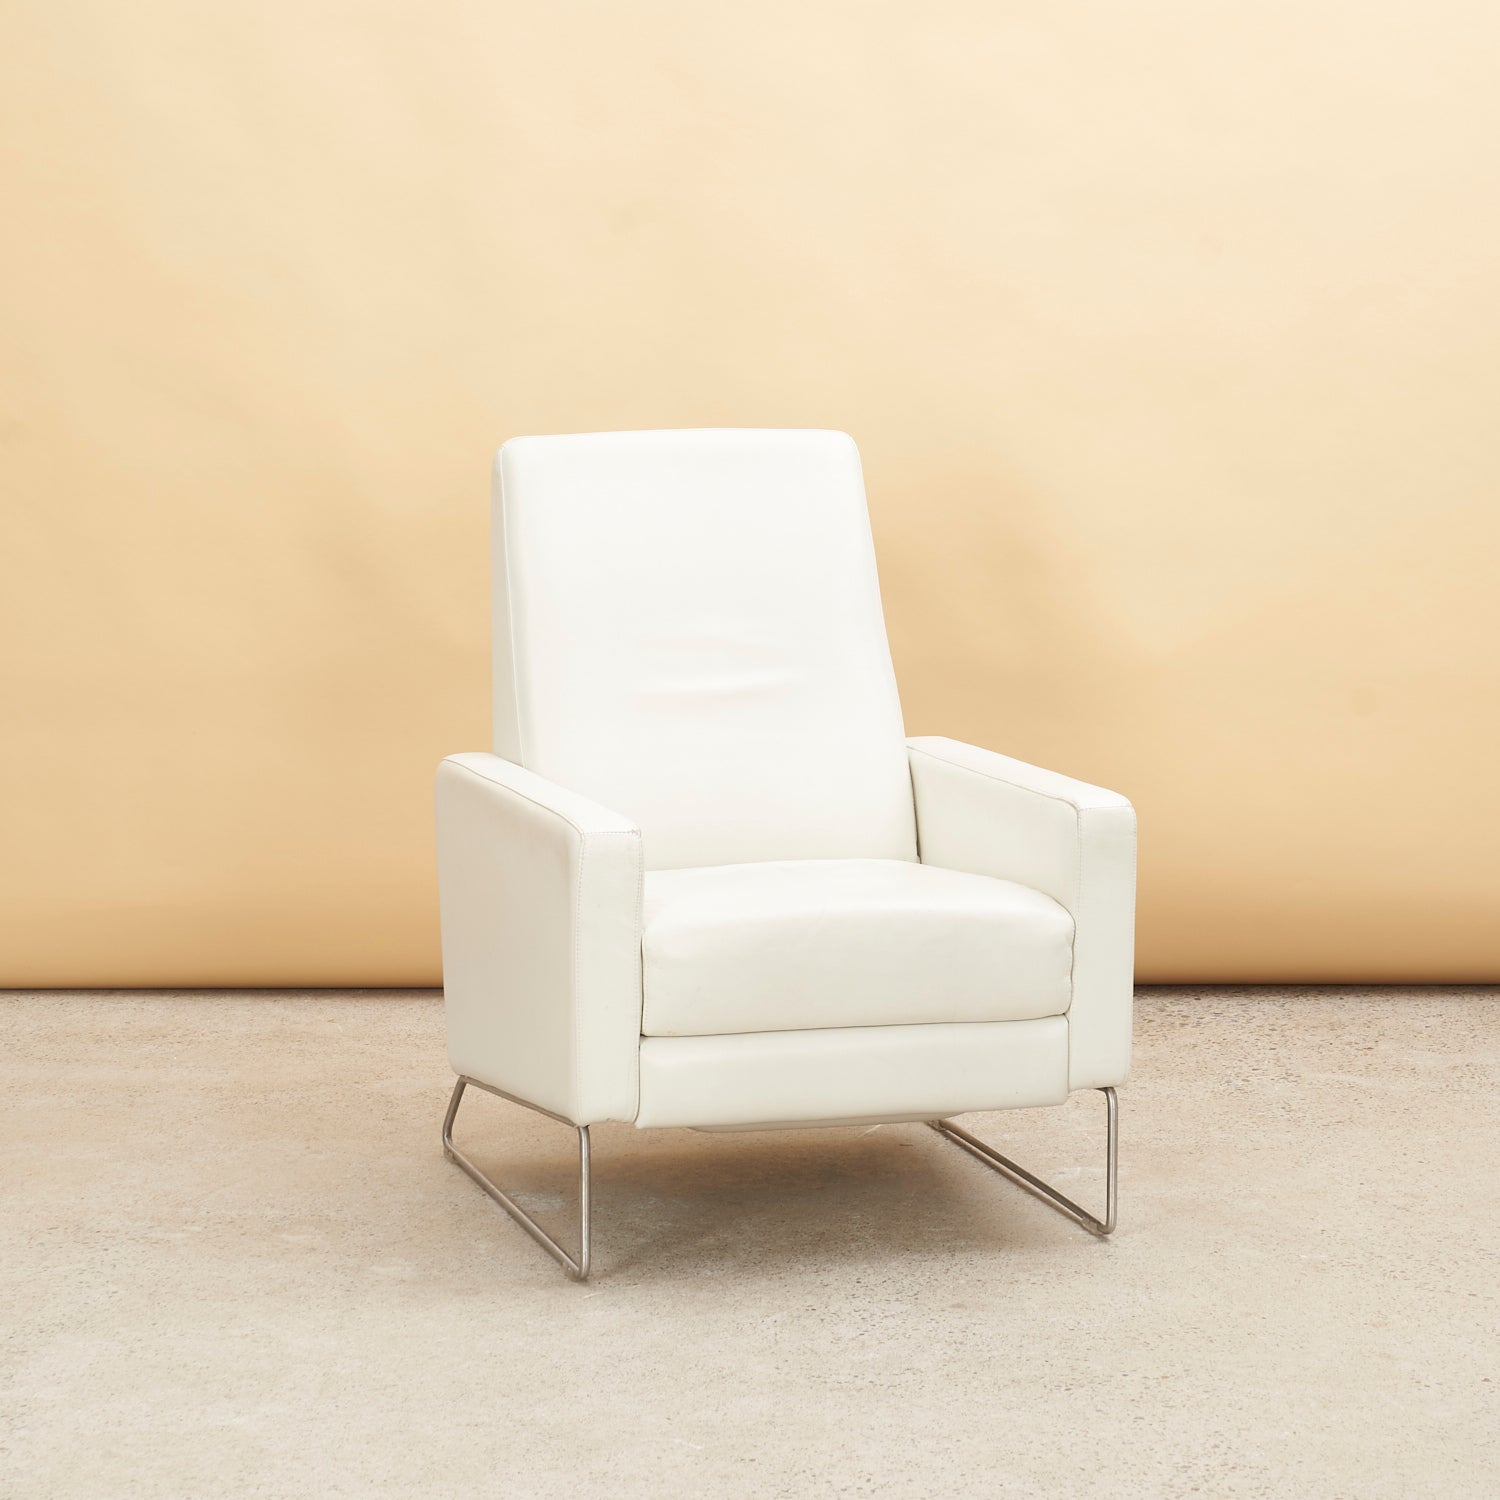 'Flight Recliner' Leather Lounge Chair by DWR